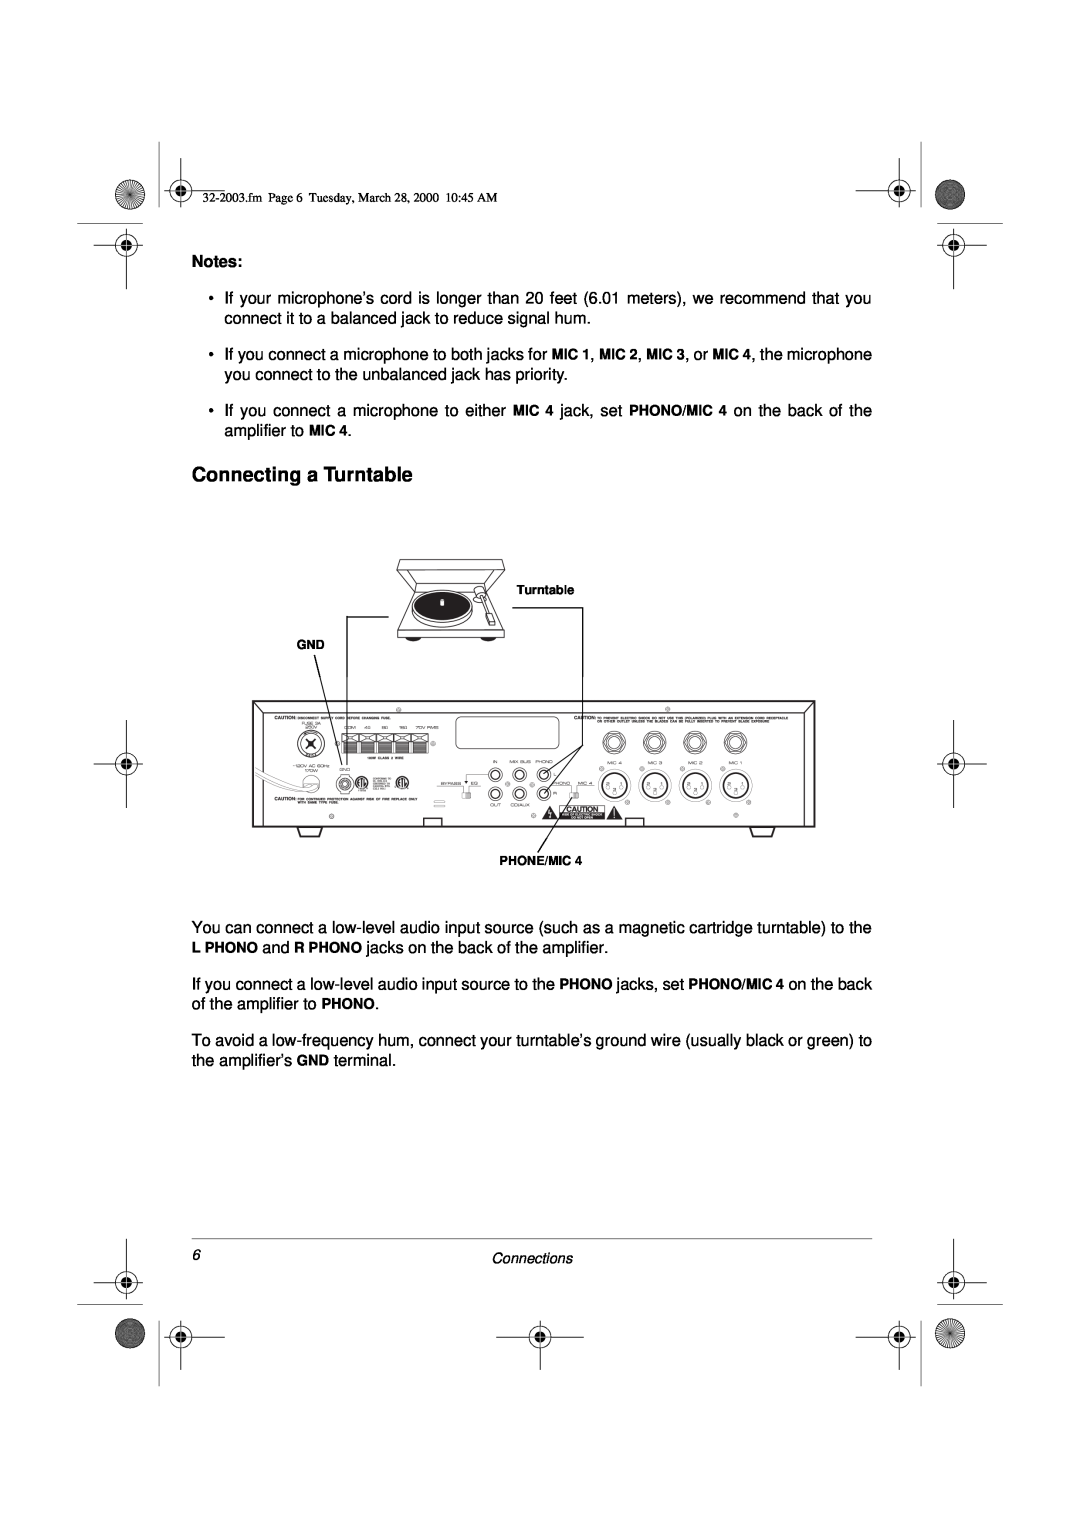 Radio Shack MPA-125 owner manual Connecting a Turntable 